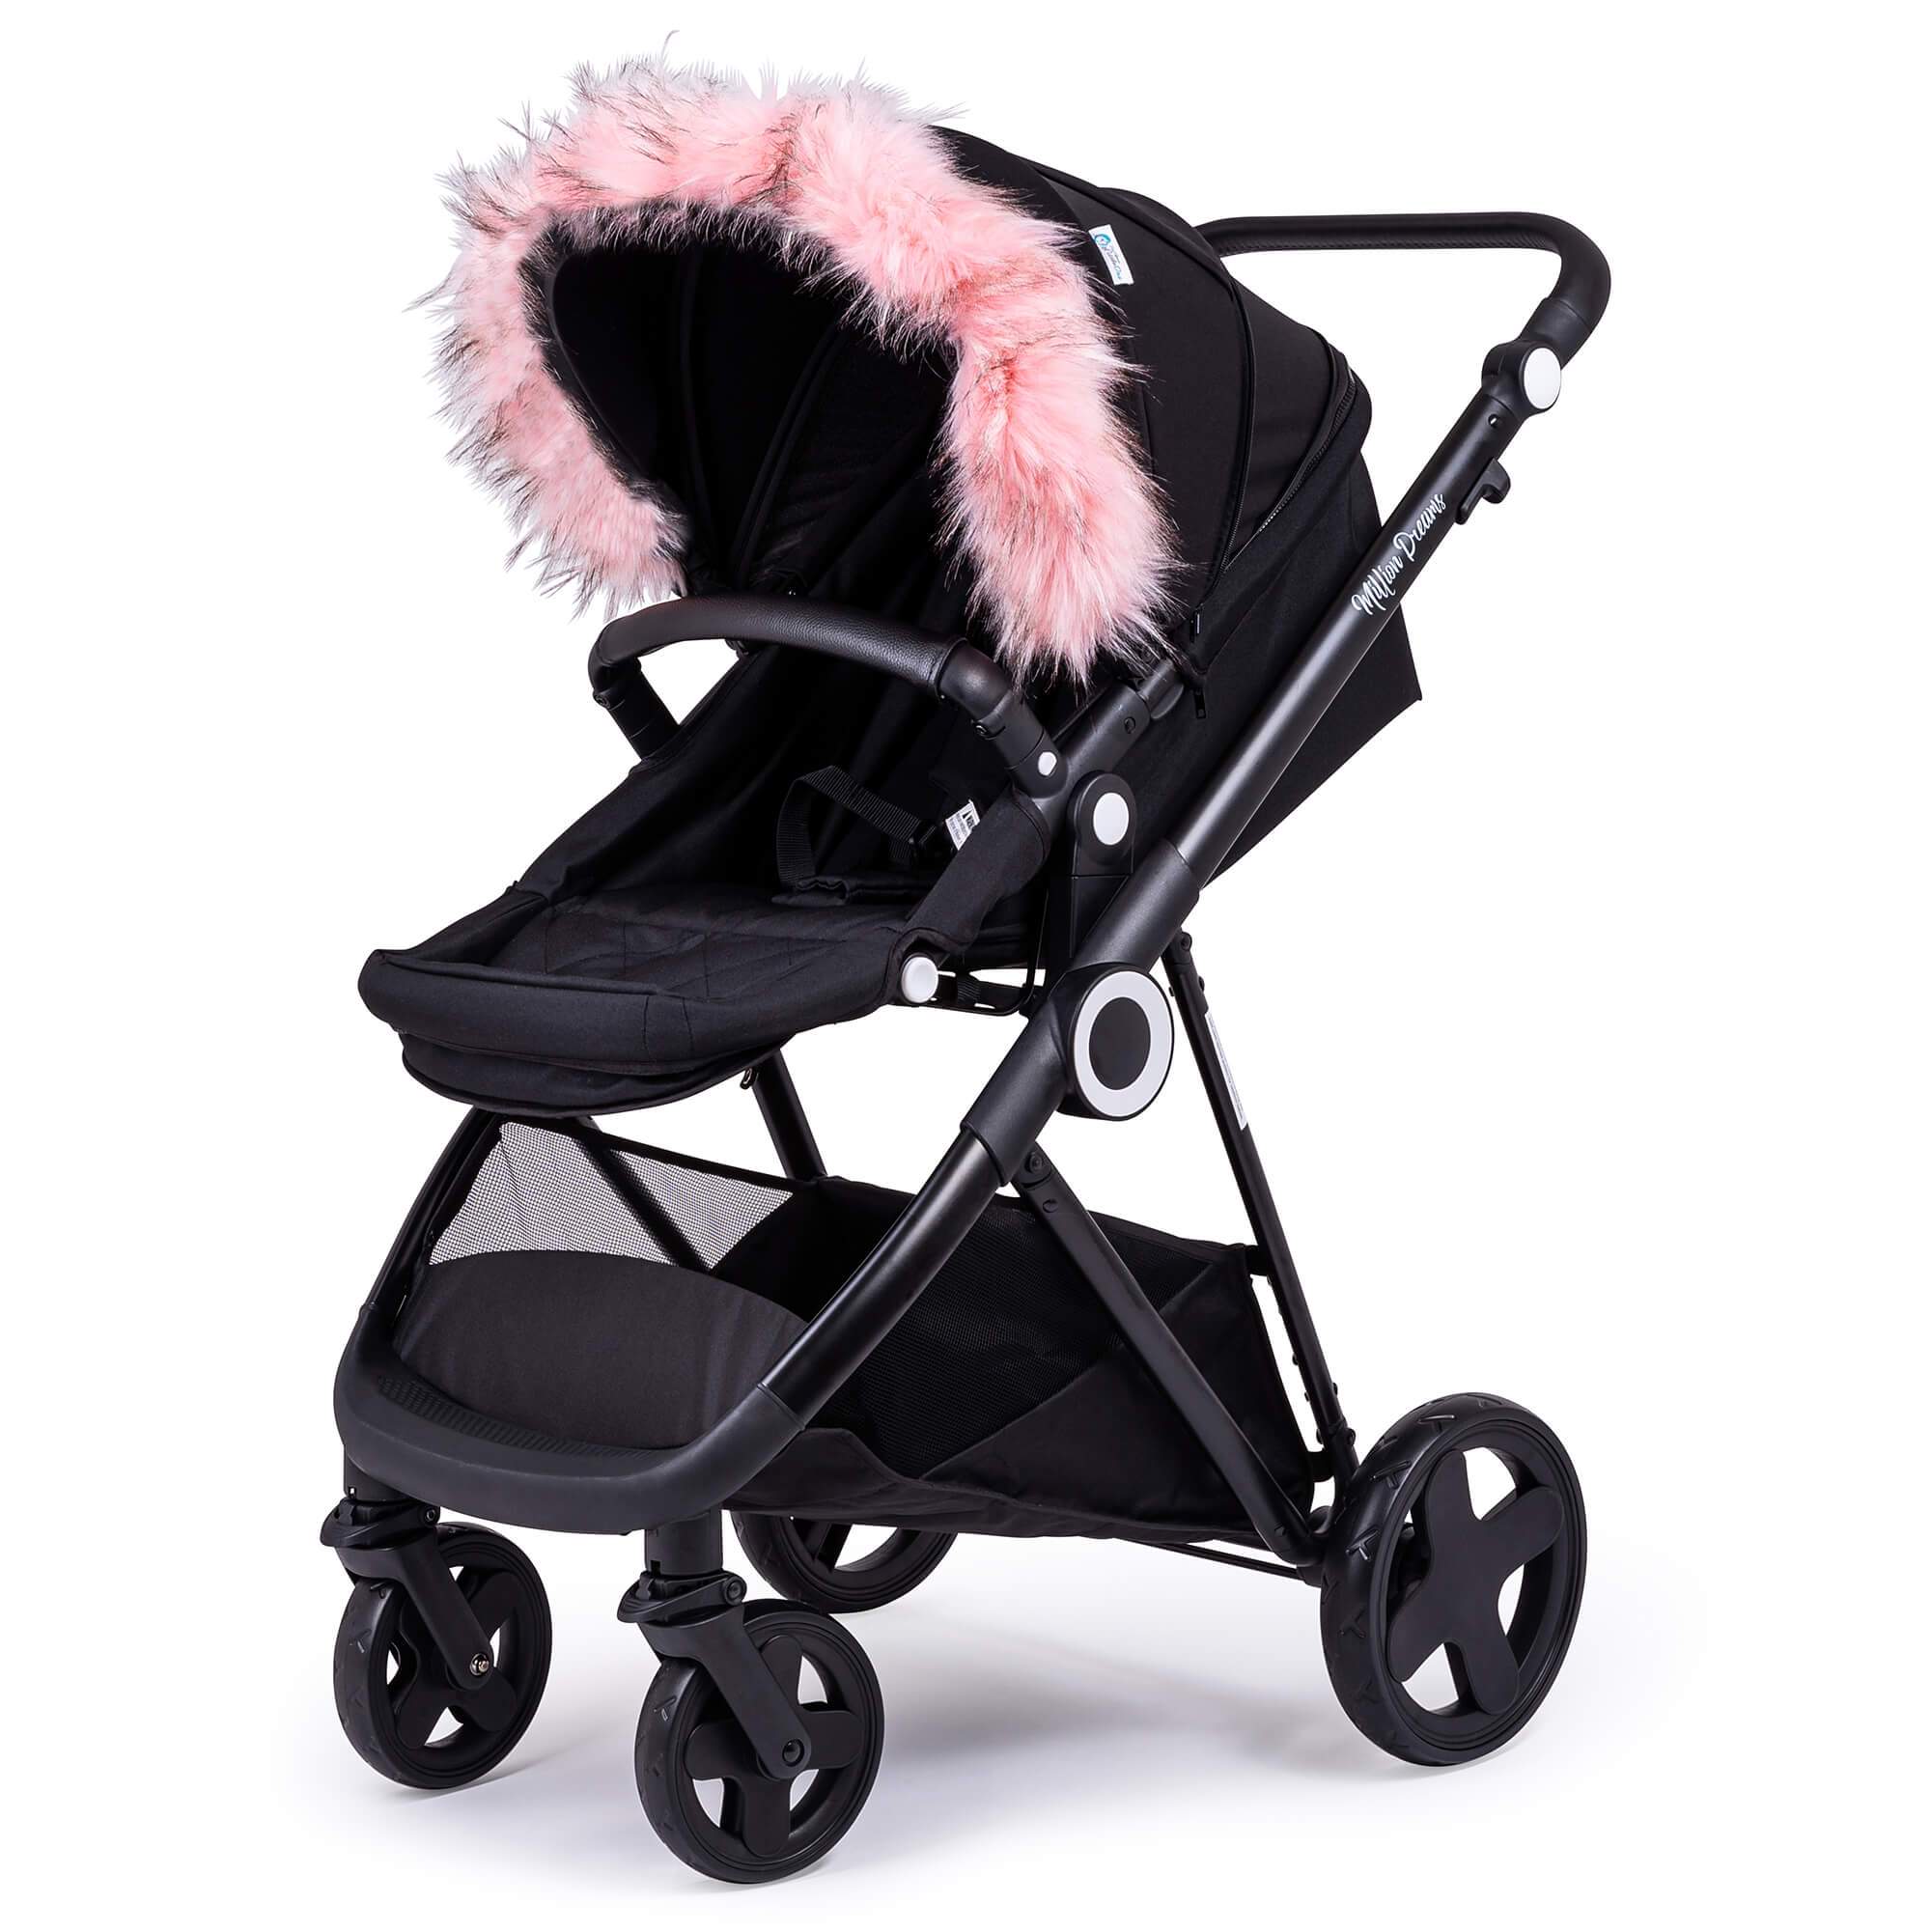 Pram Fur Hood Trim Attachment for Pushchair Compatible with Zooper - Light Pink / Fits All Models | For Your Little One